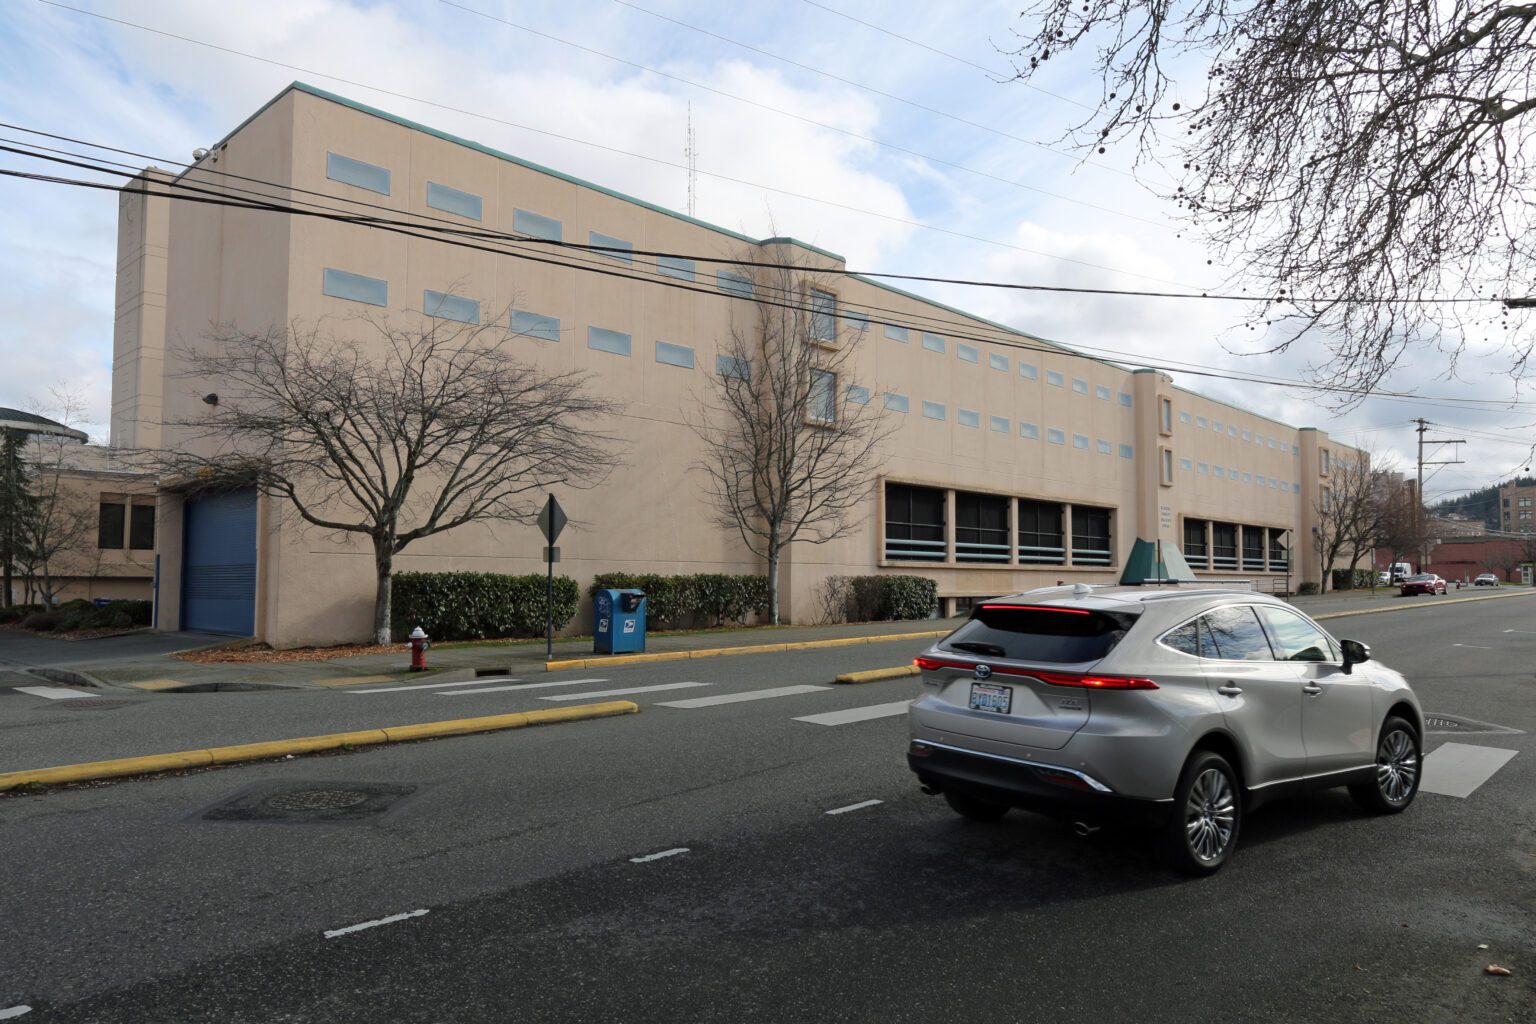 The mayors of all seven cities in Whatcom County wrote a letter to the County Council saying the current jail is inadequate for their needs. They urged the council to start setting aside funds for a new jail now.